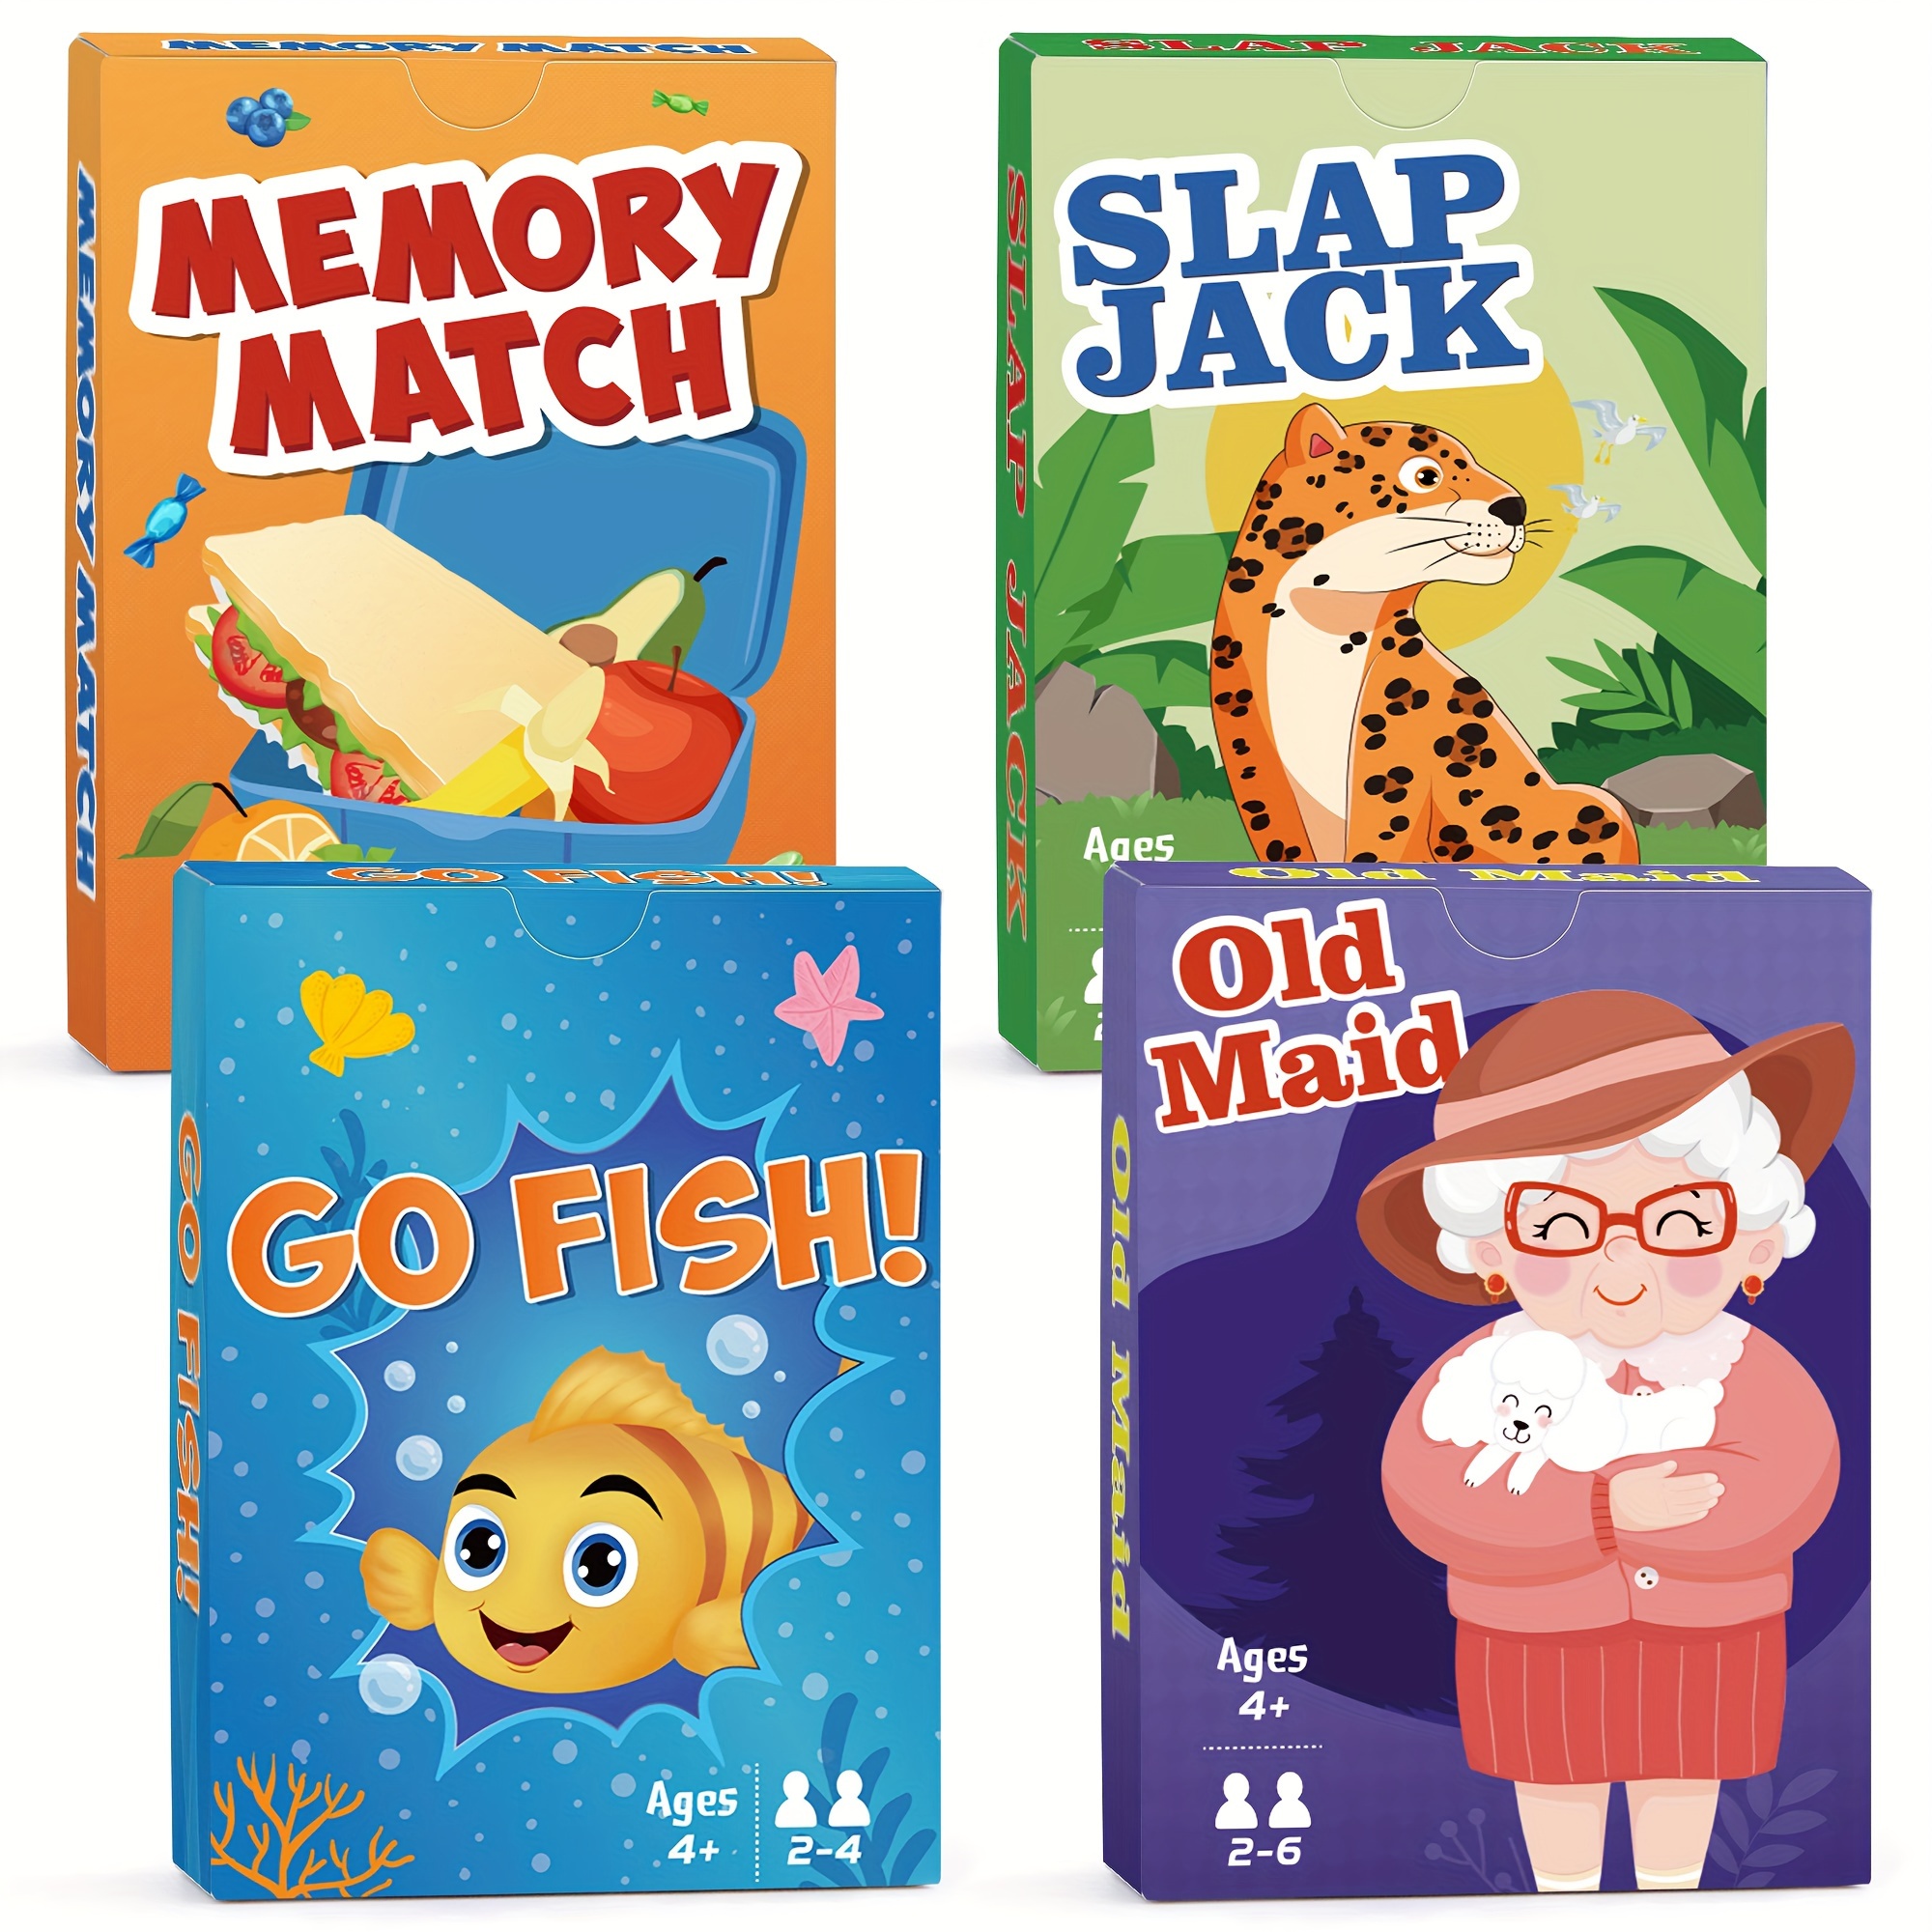 

172-piece Card Game , Old Maid, Slap Jack And Memory Match-4 Pack, Classic Card Game For Children 4 Years And Older, Card Game For Children And Adult Family Gatherings, Fun Gift For Boys And Girls